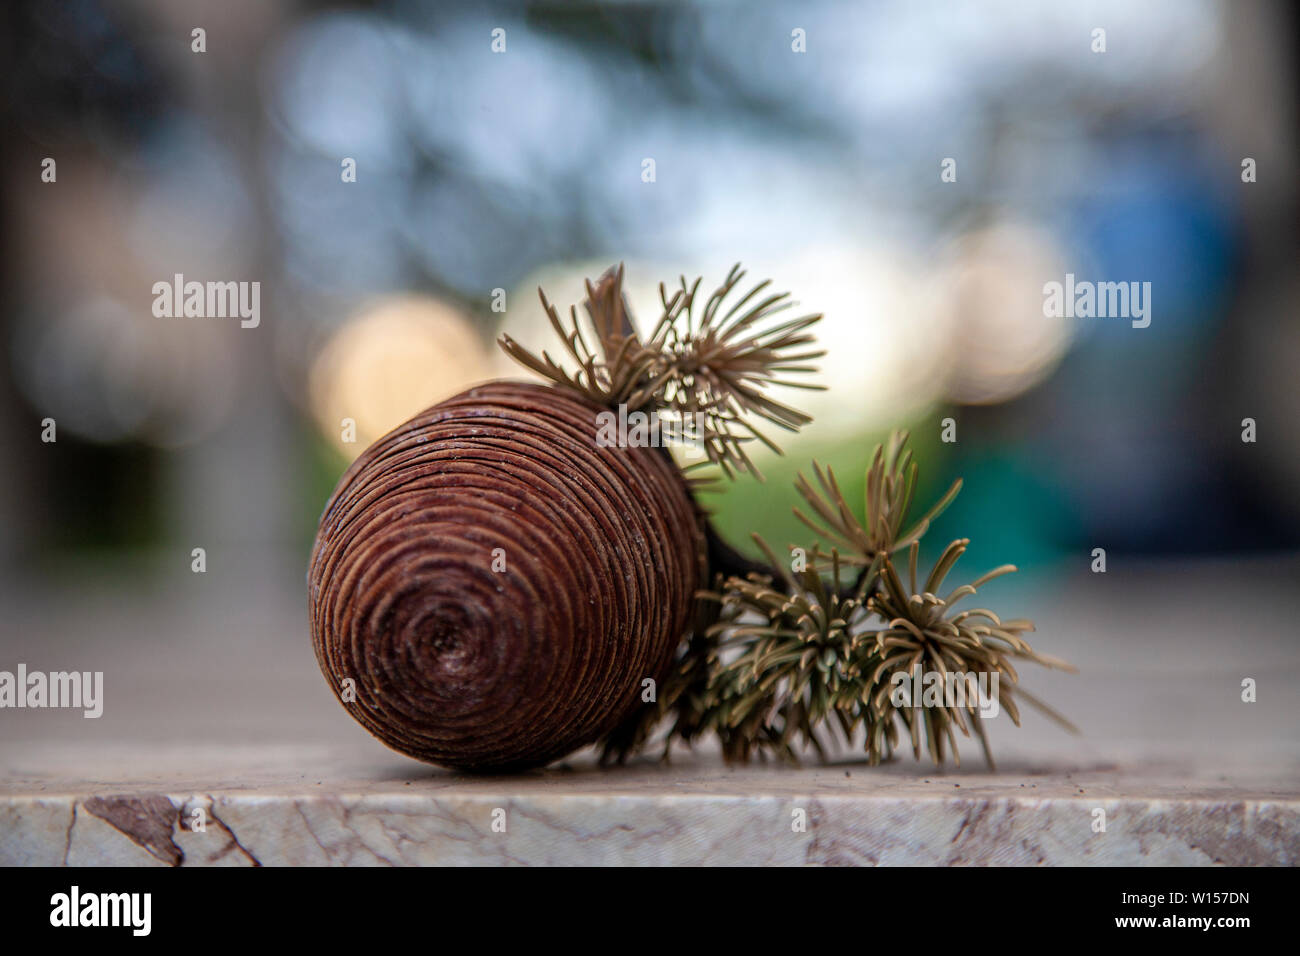 a pine cone on the mossy floor stone. Stock Photo